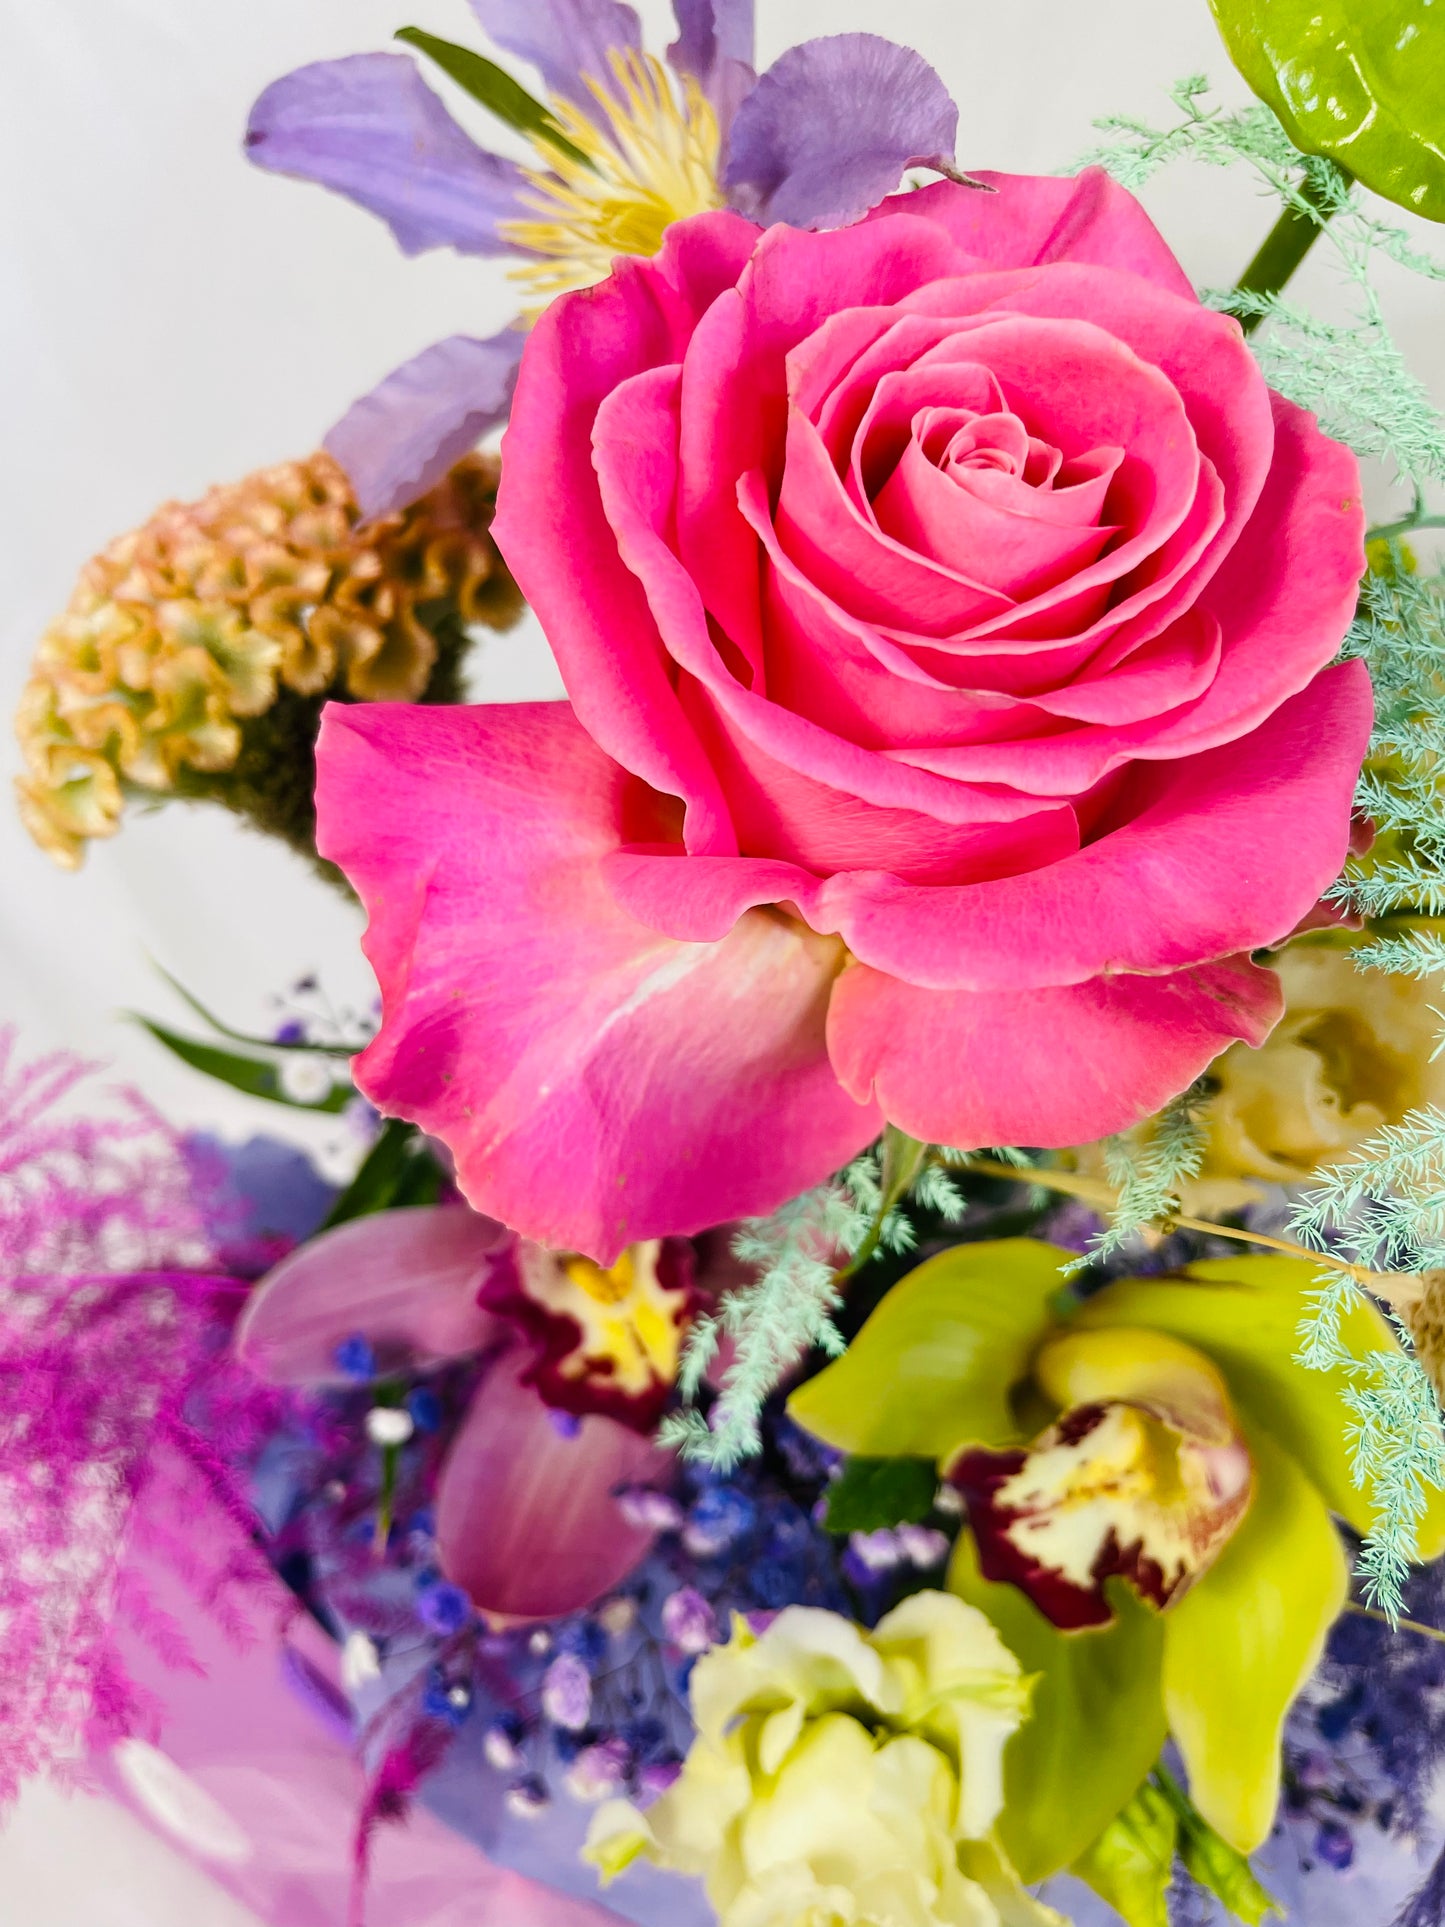 Lucky bouquet  is a blissful flower arrangement featuring Caribbean Anthurium ,french clematis, sweet scented rose, exotic orchids, rainbow gypsophila, blush lisianthus, agapanthus, stunning celosia and painted asparagus fern in bright colours. By Bimba Floral Studio.